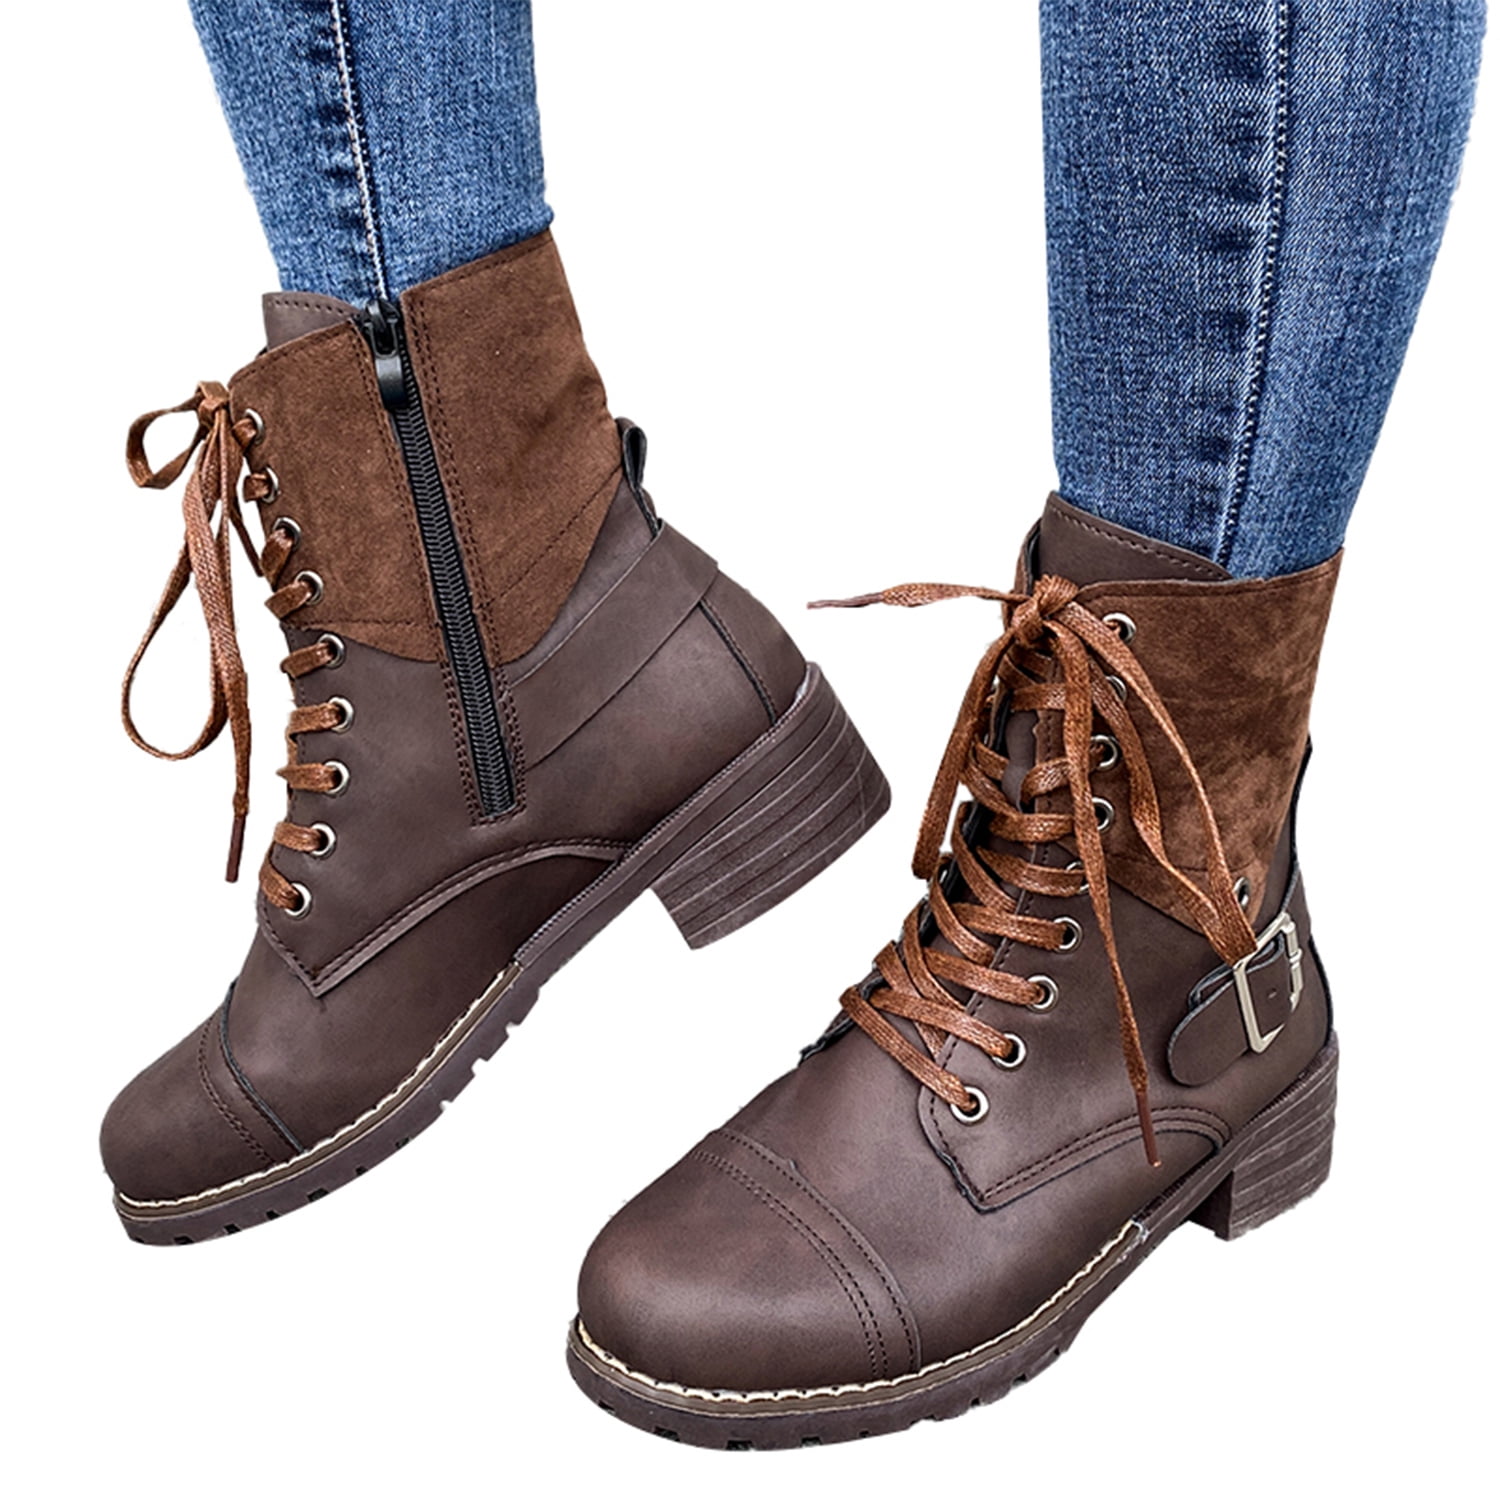 Fashion Buckle Lace up Womens Combat Military Boots Zip Faux Leather Womens Mid-Calf Boots Winter Shoes